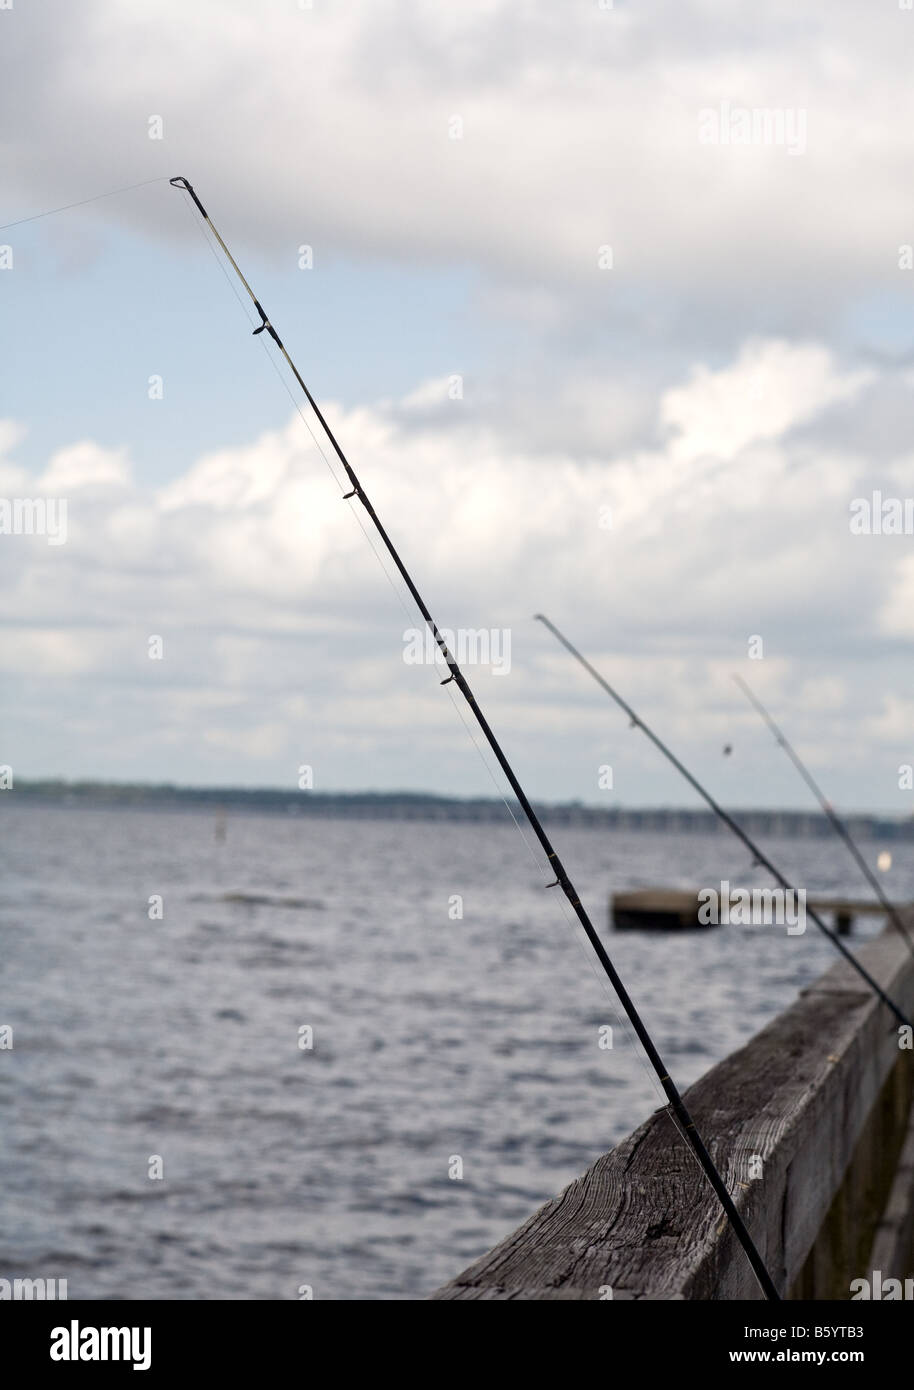 A fishings pole leaning against the wooden railing by the water Stock Photo  - Alamy